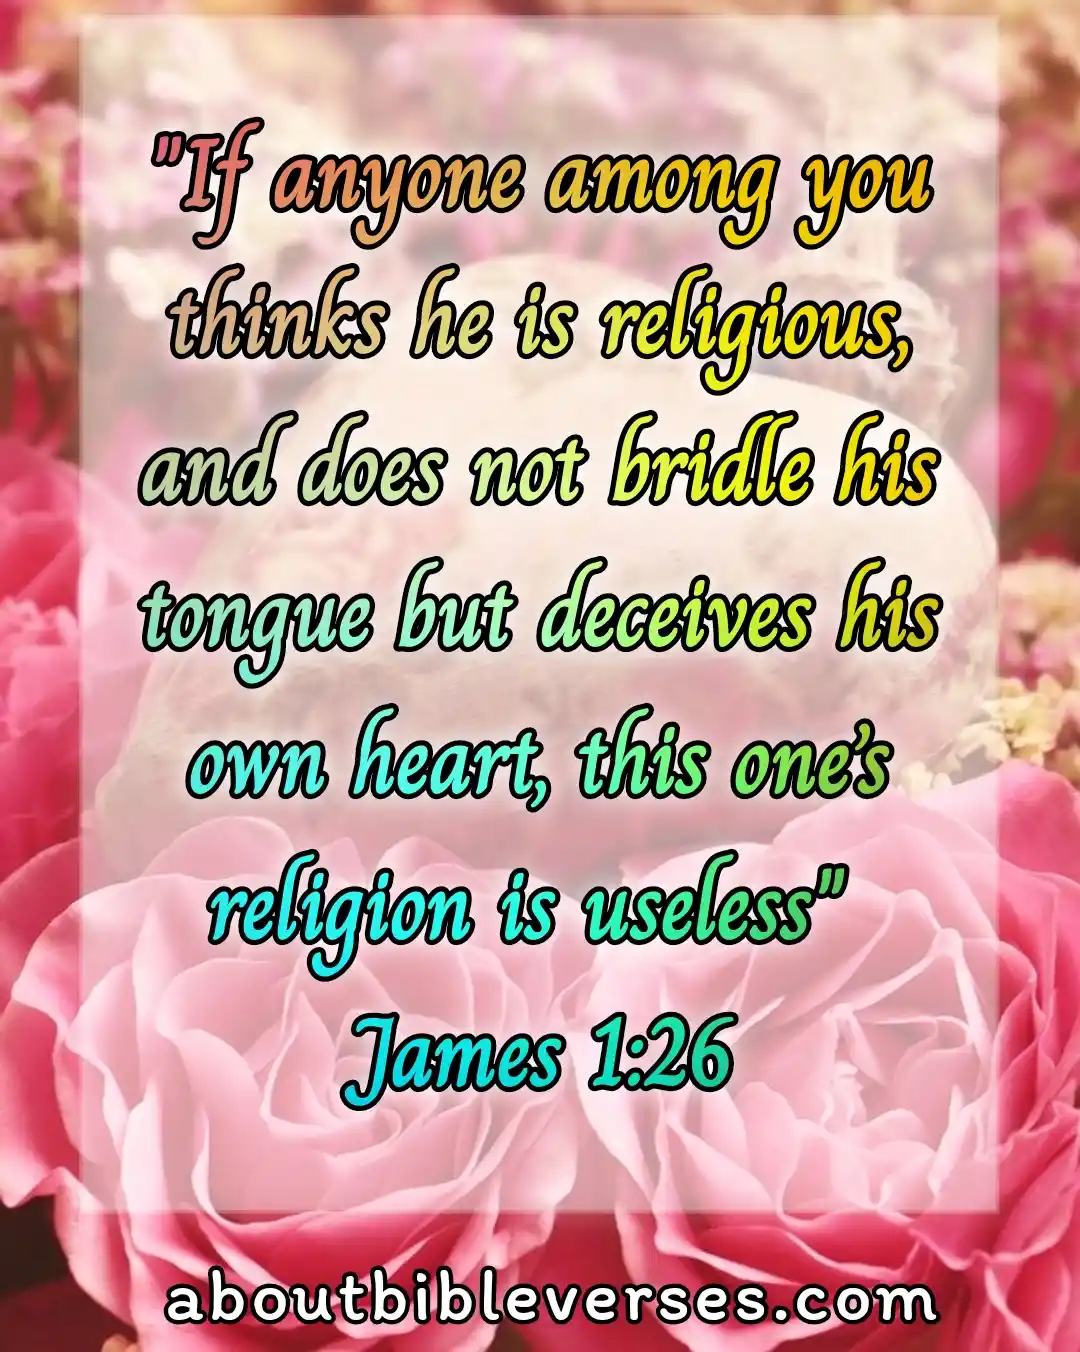 bible verses about being careful what you say (James 1:26)